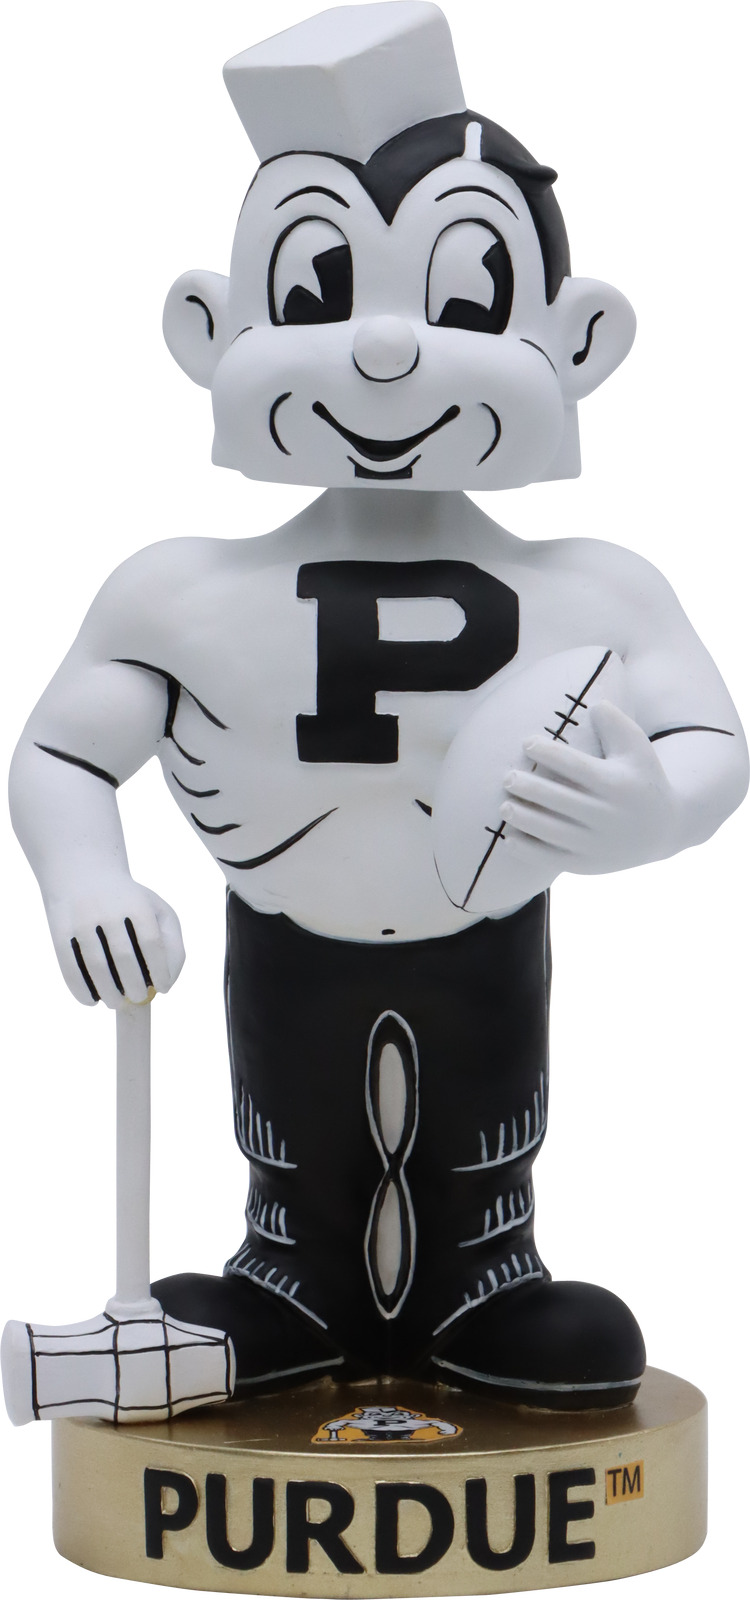 Purdue Boilermakers Vintage Holding Hammer And Football Bobblehead NCAA College